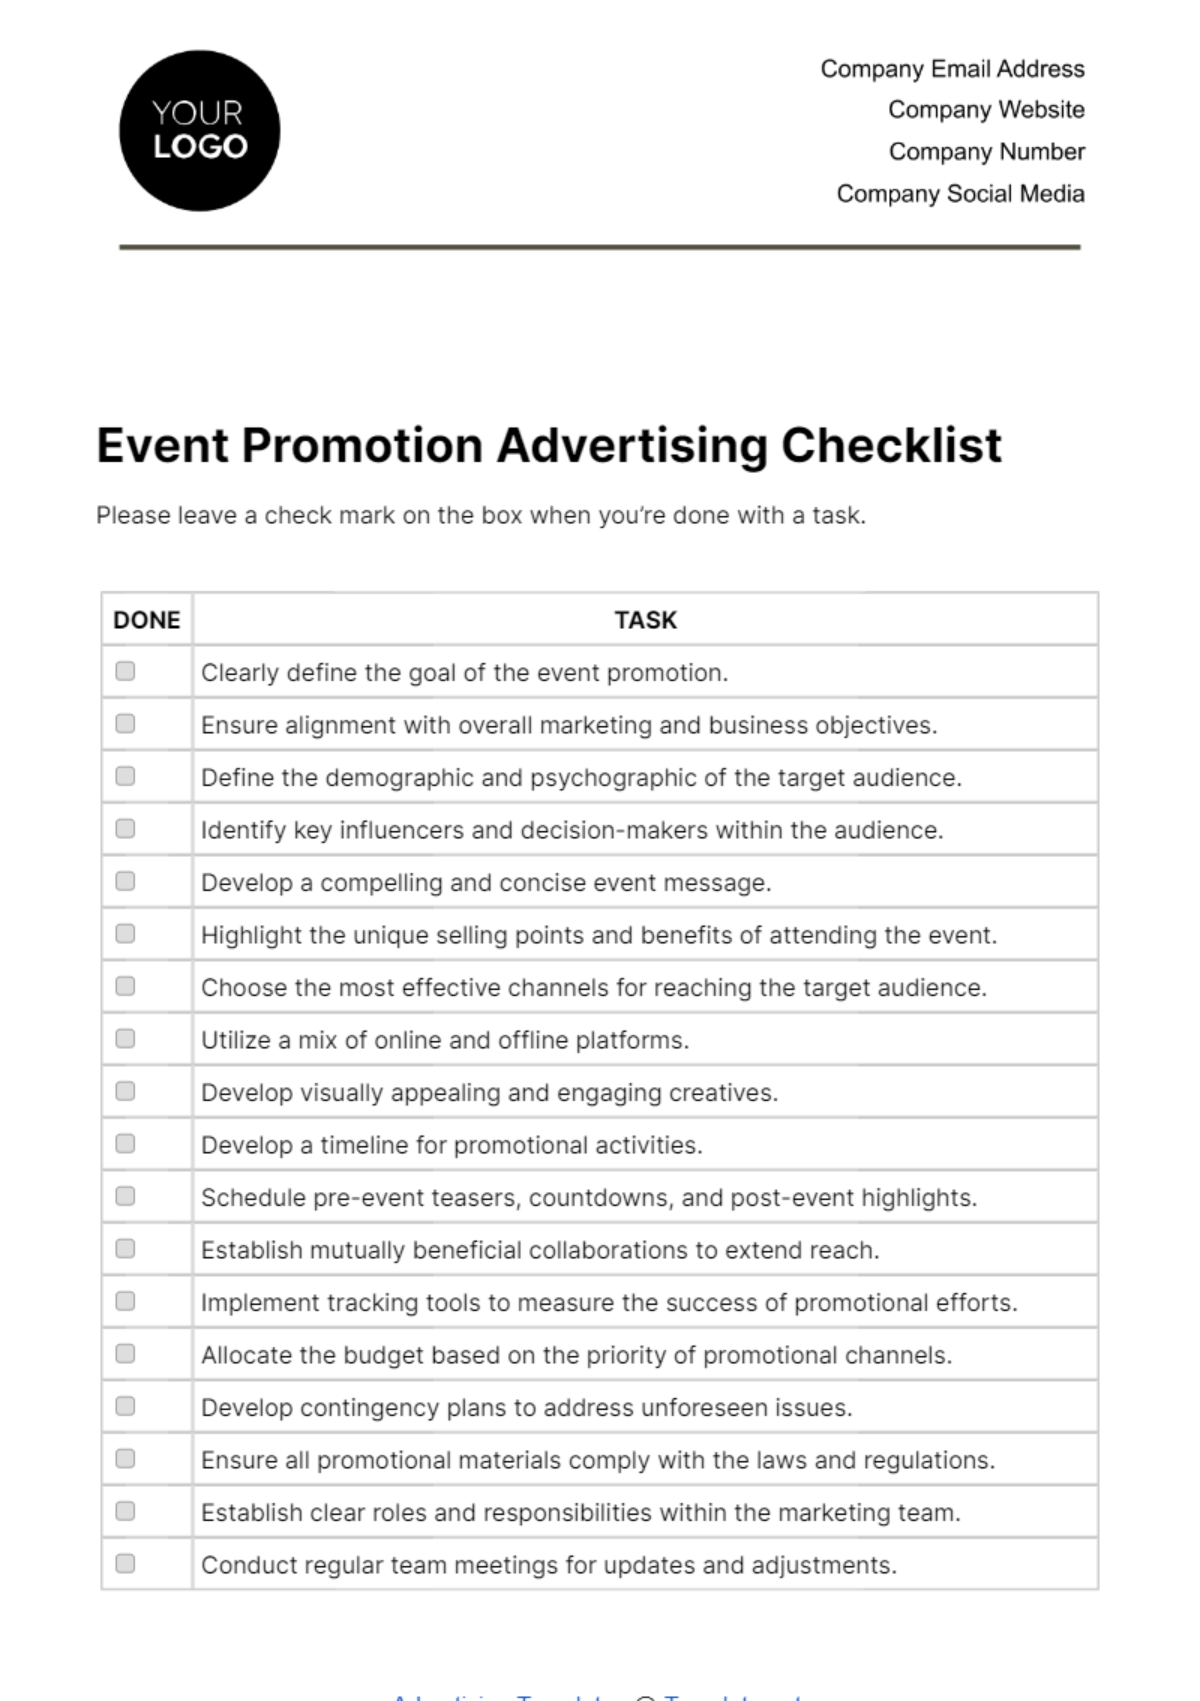 Event Promotion Advertising Checklist Template